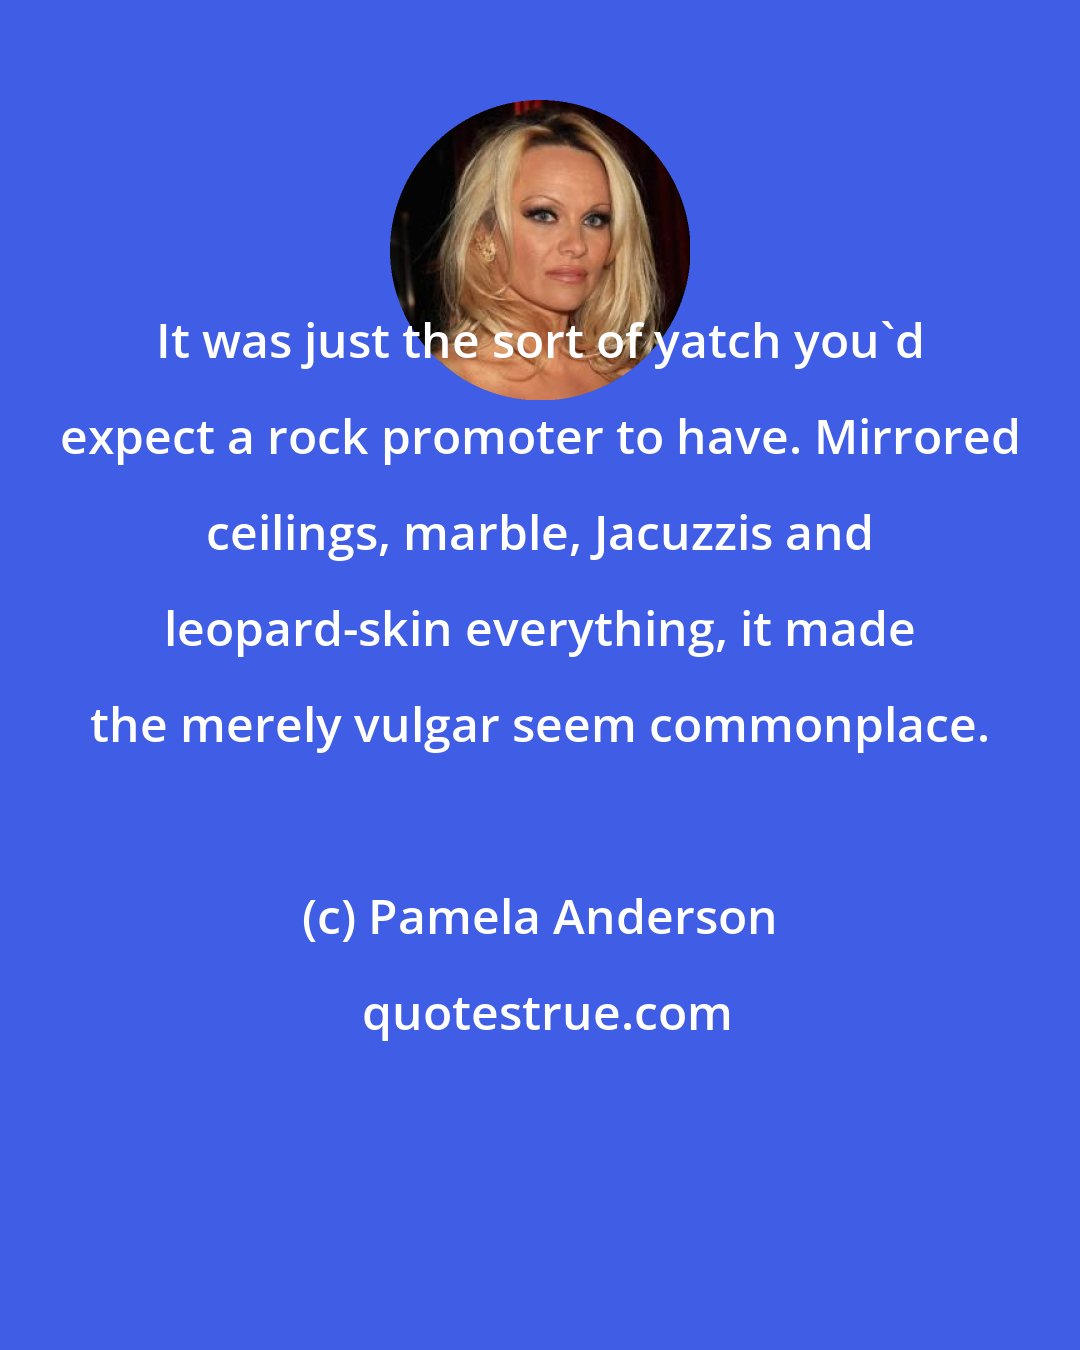 Pamela Anderson: It was just the sort of yatch you'd expect a rock promoter to have. Mirrored ceilings, marble, Jacuzzis and leopard-skin everything, it made the merely vulgar seem commonplace.